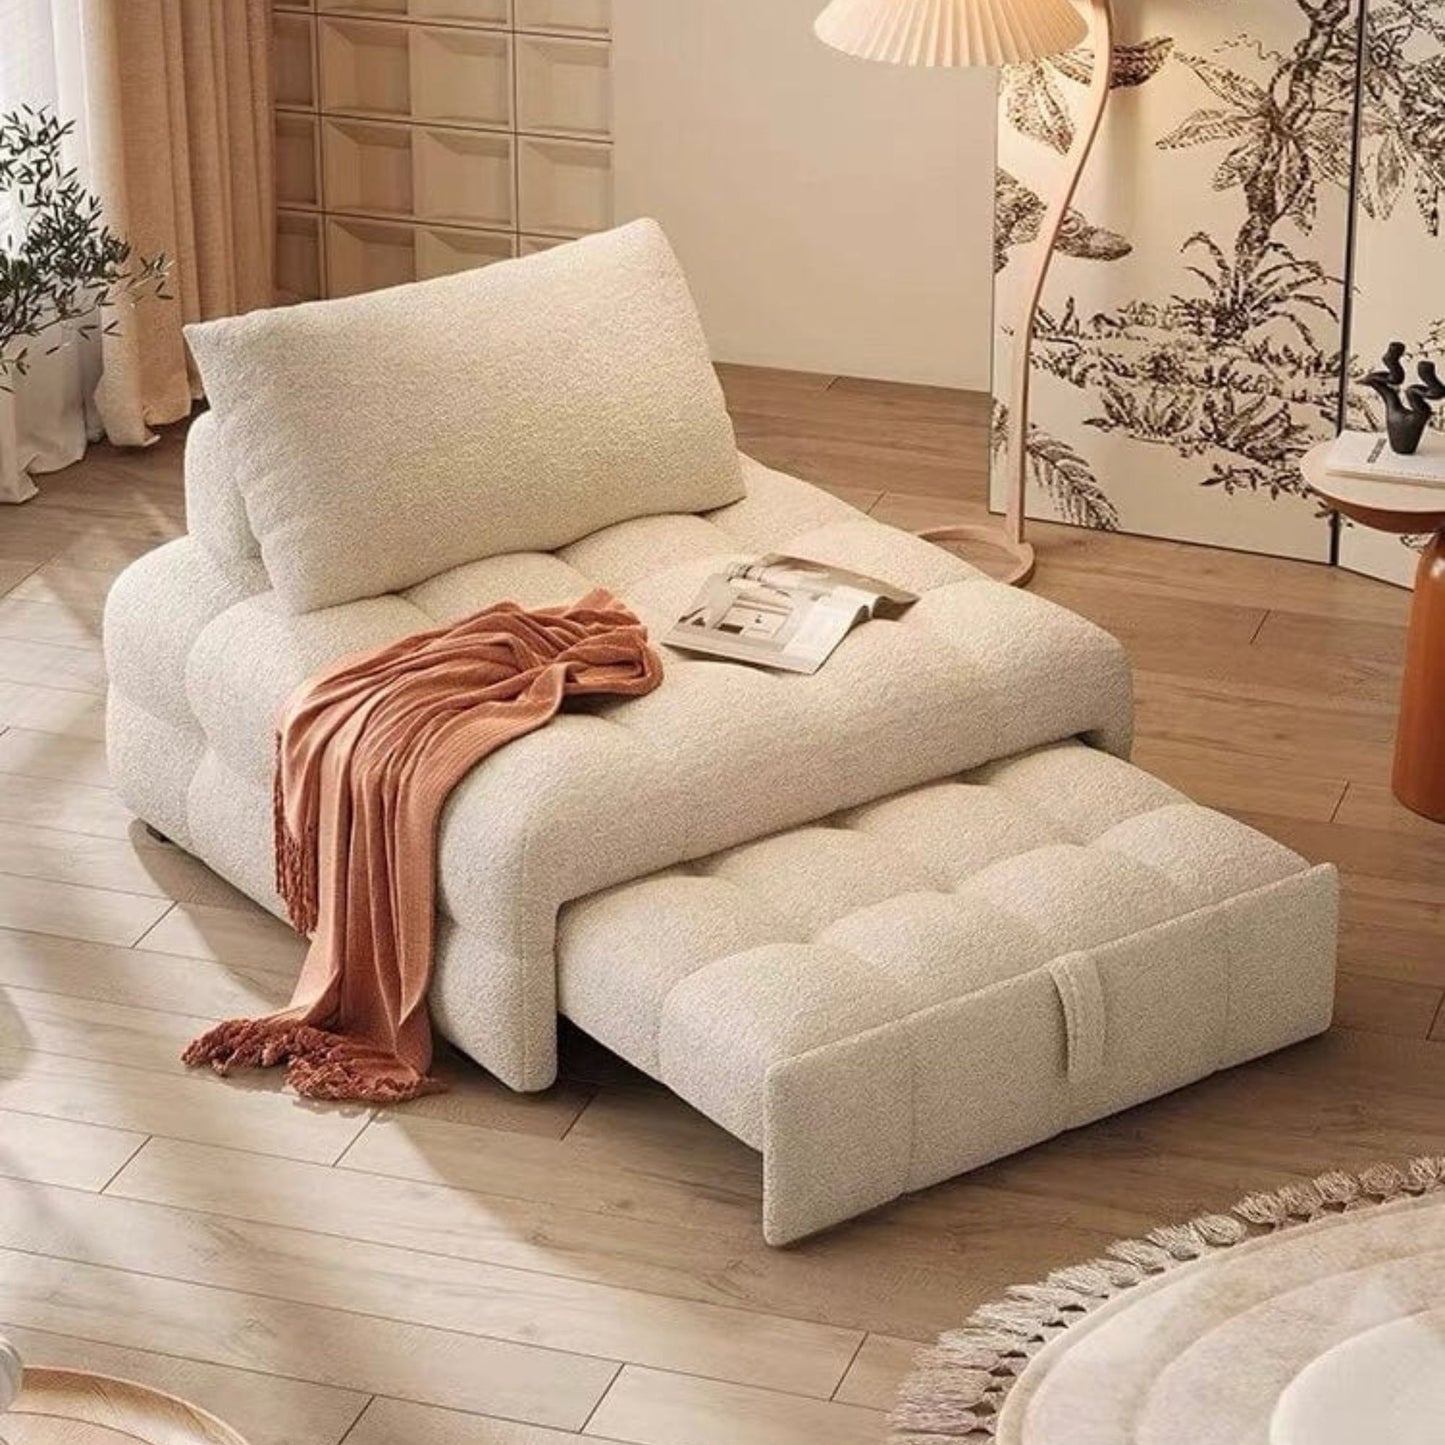 Candy white fabric sofa bed